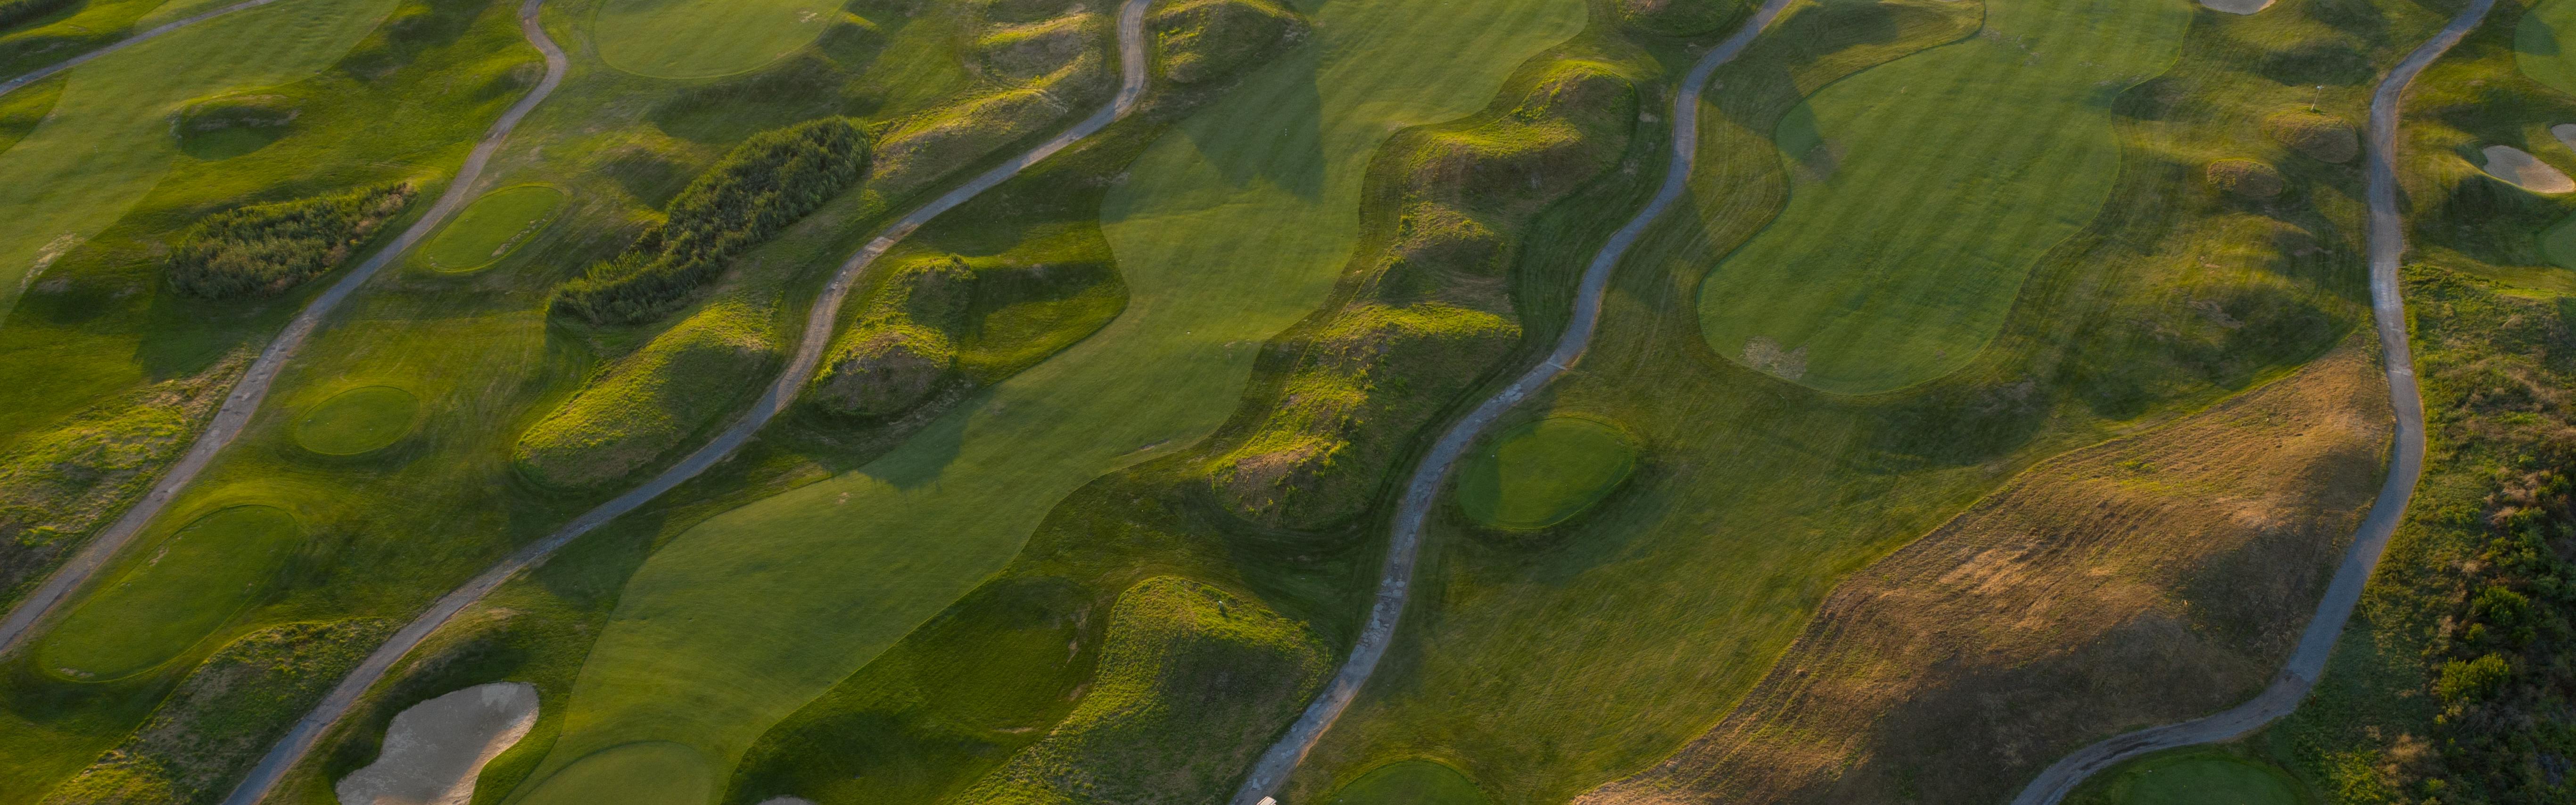 Sky view of a golf course where you can see many fairways, greens, and golf cart trails. 